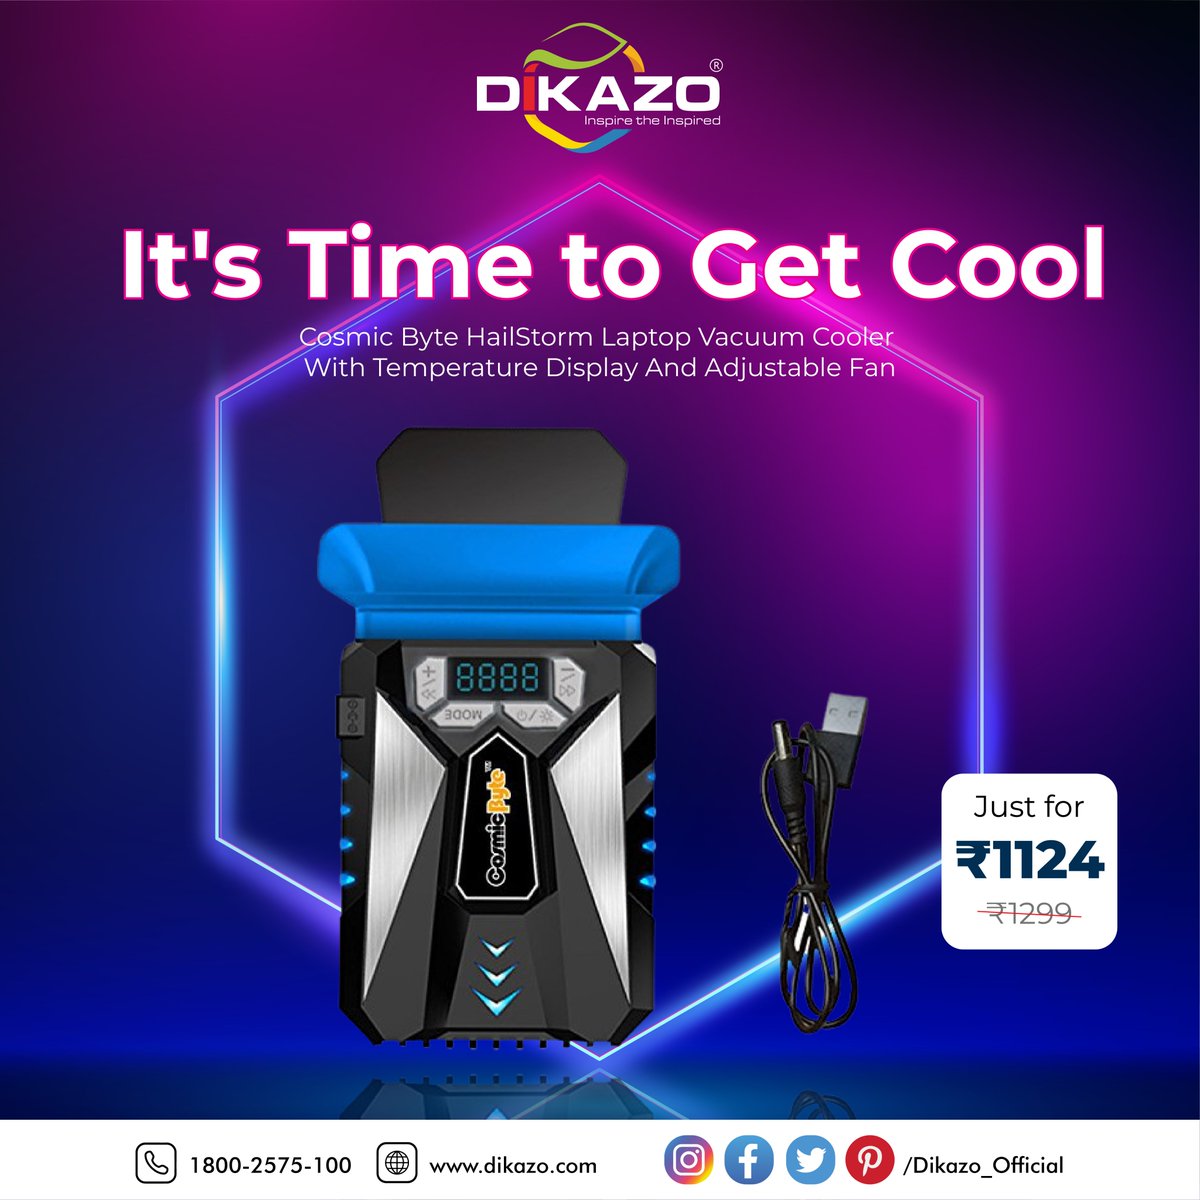 Stay cool and in control while gaming or working with the Cosmic Byte HailStorm Laptop Vacuum Cooler featuring a temperature display, adjustable fan, and ultimate heat dissipation. #CoolingSolutions #GamingEssentials 
visit- dikazo.com/product/cosmic…